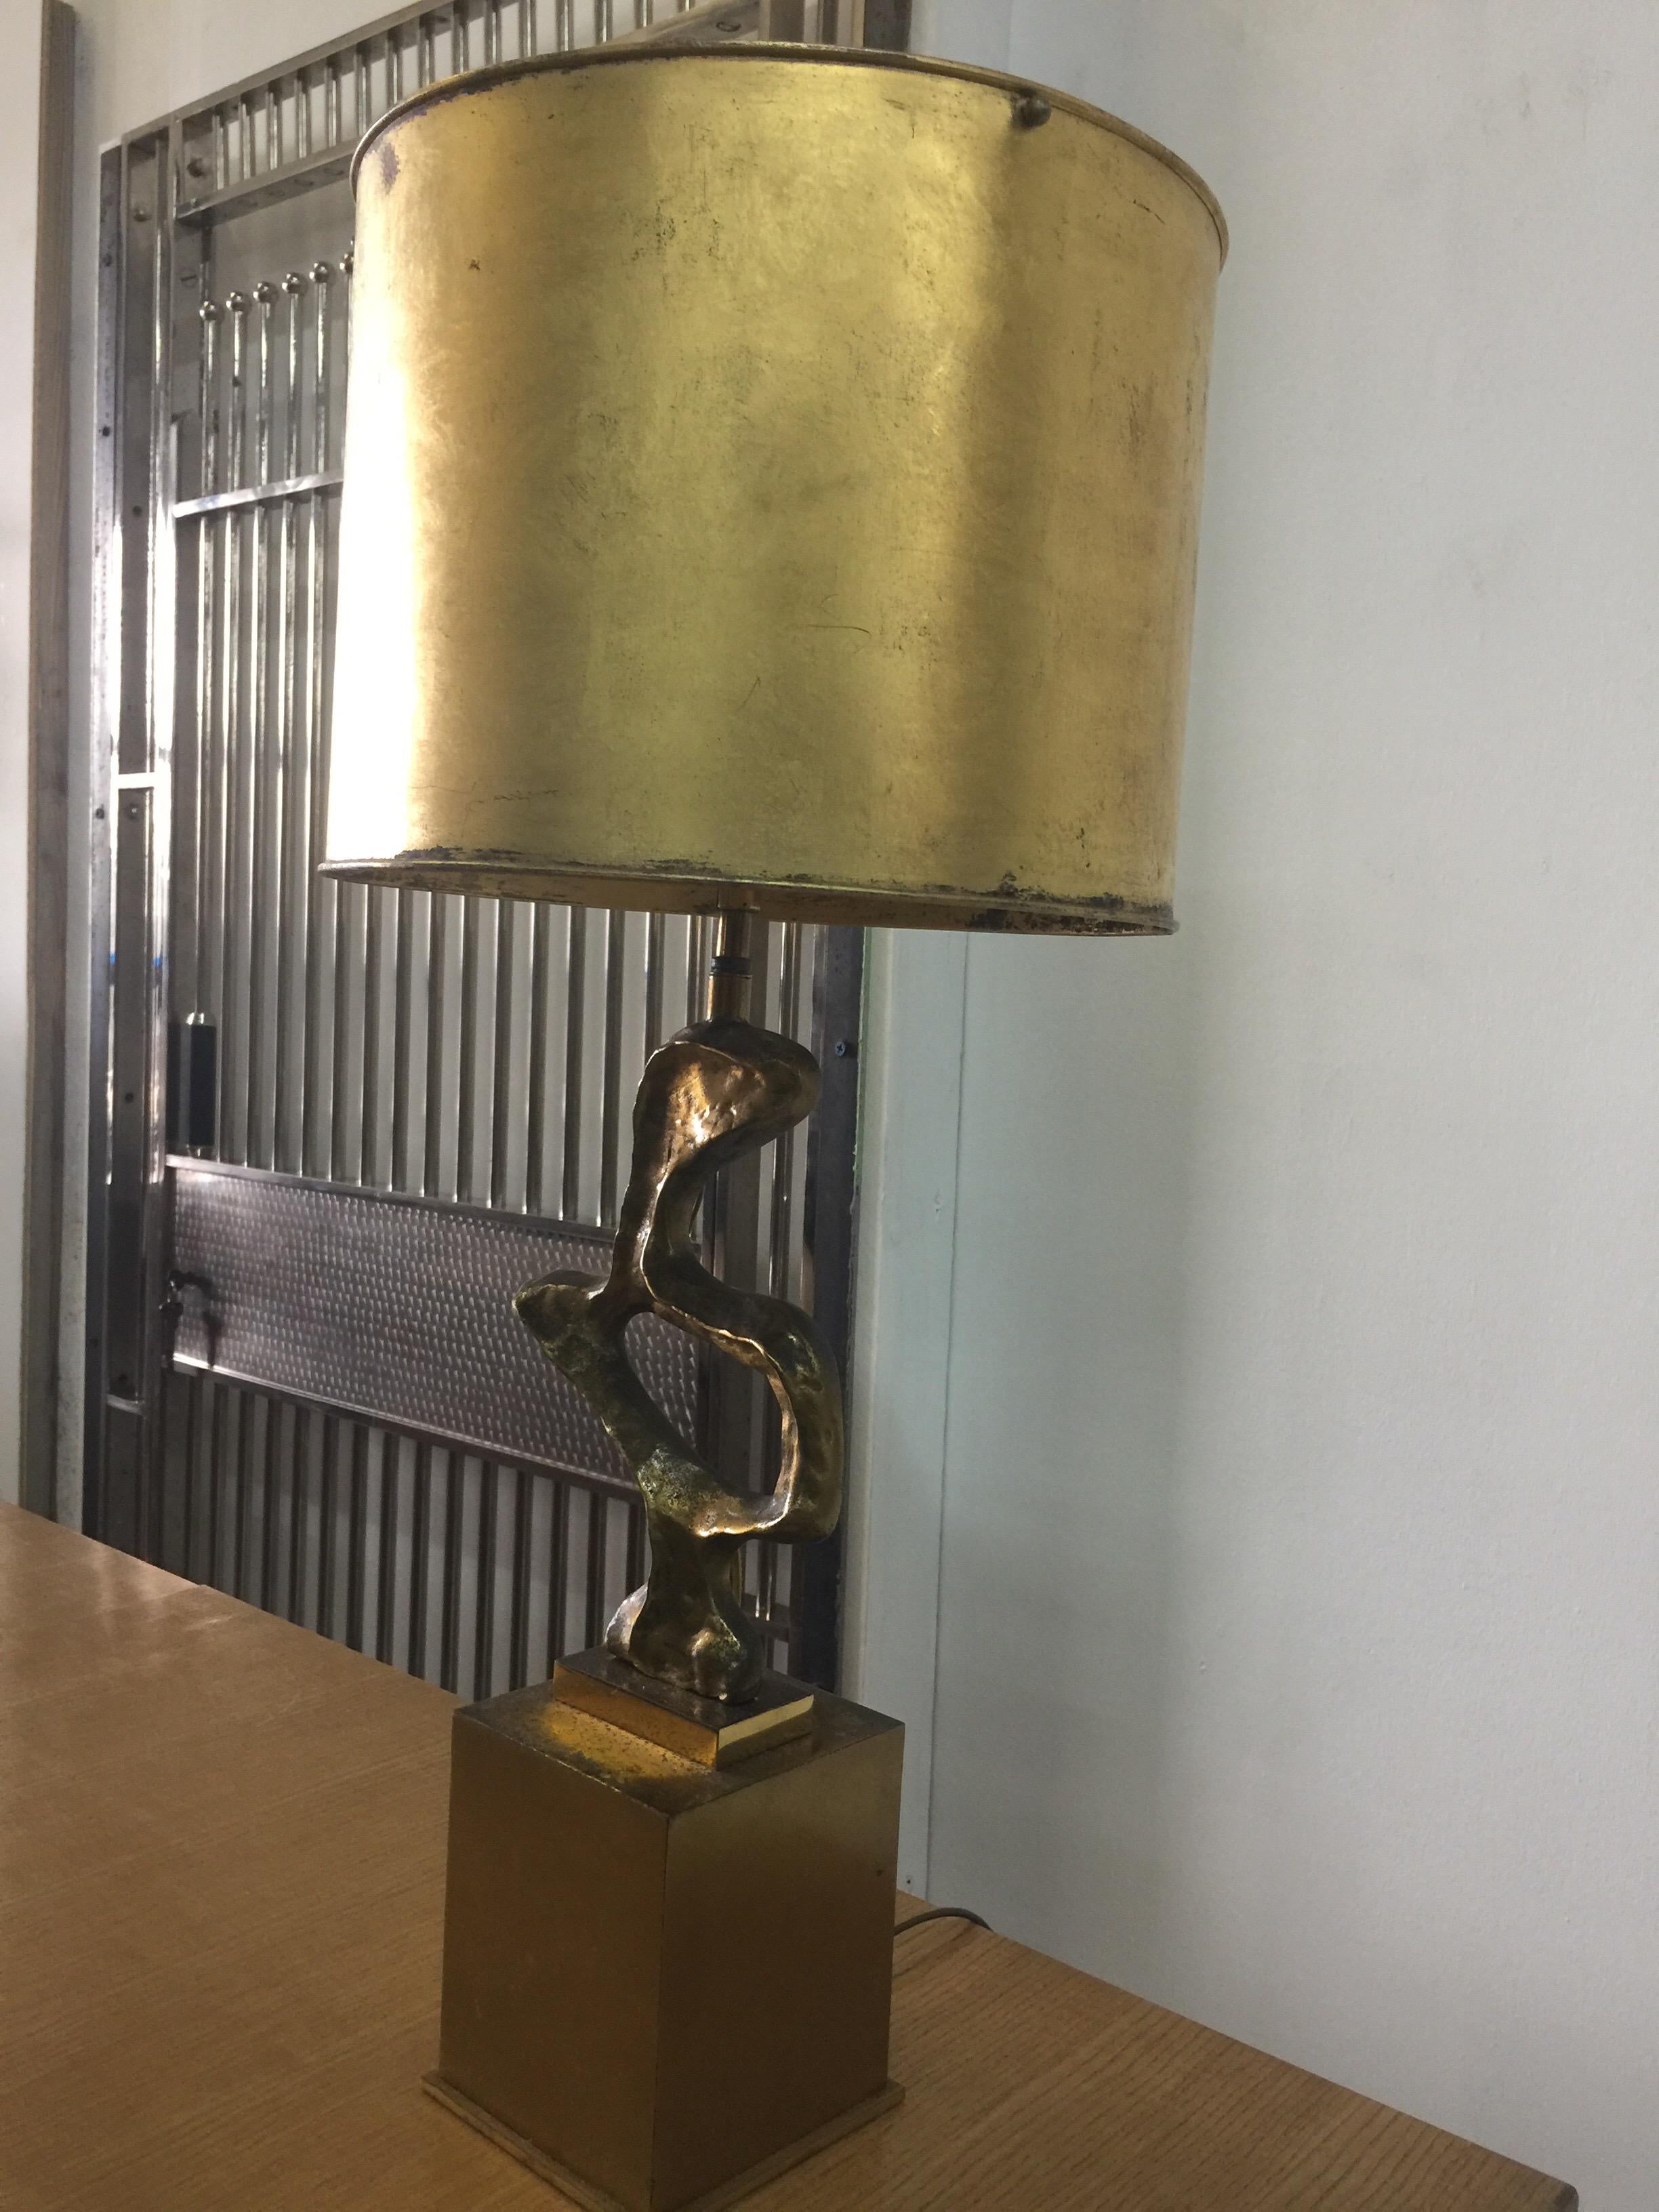 Signed R. Thibier & Papineau - gilt bronze table lamp by the French artist designer Roger Thibier, neoclassical style, Art Deco inspiration. Very exclusive and great quality. Original shade is gilded and included in price. Three (3) European sockets